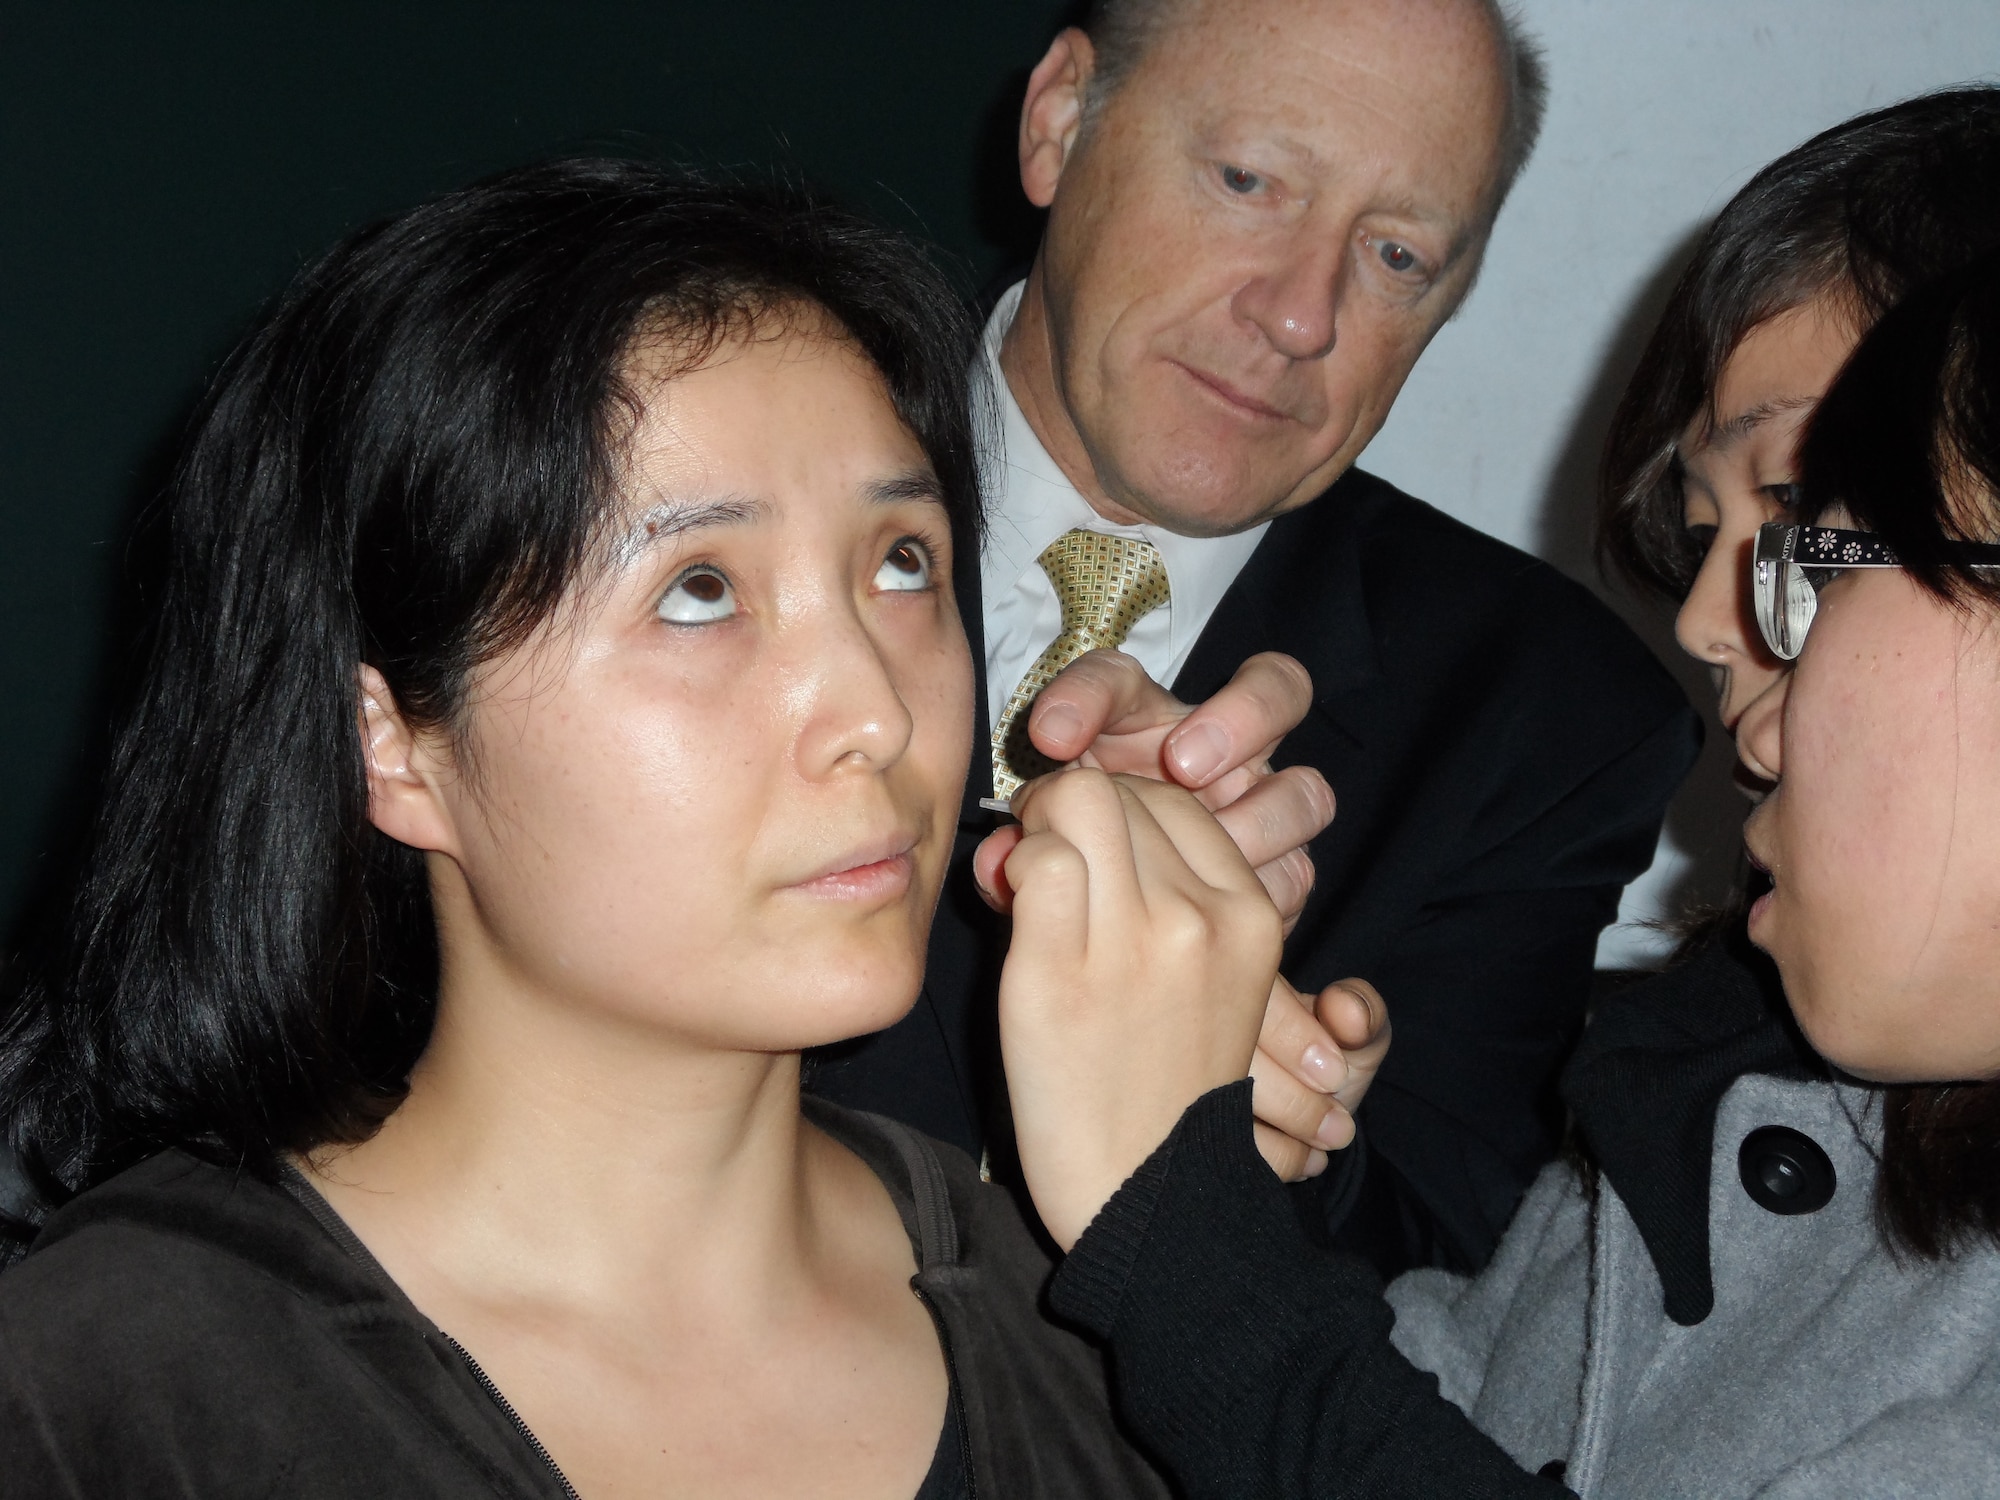 Dr. John Baxter, (middle) Pentagon Clinic Director and acupuncturist, assists a Beijing University of Chinese Medicine student with inserting acupuncture needles into fellow student, Minli Sun's ear Oct. 24, 2012 in Beijing, China. During the medical exchange, Sun explained that she had experience back pain from a car accident that happened when she was 12 years old. She told fellow students her pain was gone after 3 needles of using the battlefield acupuncture procedure. At the invitation of China's People Liberation Army, U.S. Air Force medical physicians, alongside their Chinese military and civilian counterparts, conducted the first-ever Medical Acupuncture Subject Matter Expert Exchange in Beijing Oct. 21-27, 2012. (U.S. Air Force courtesy photo) 
